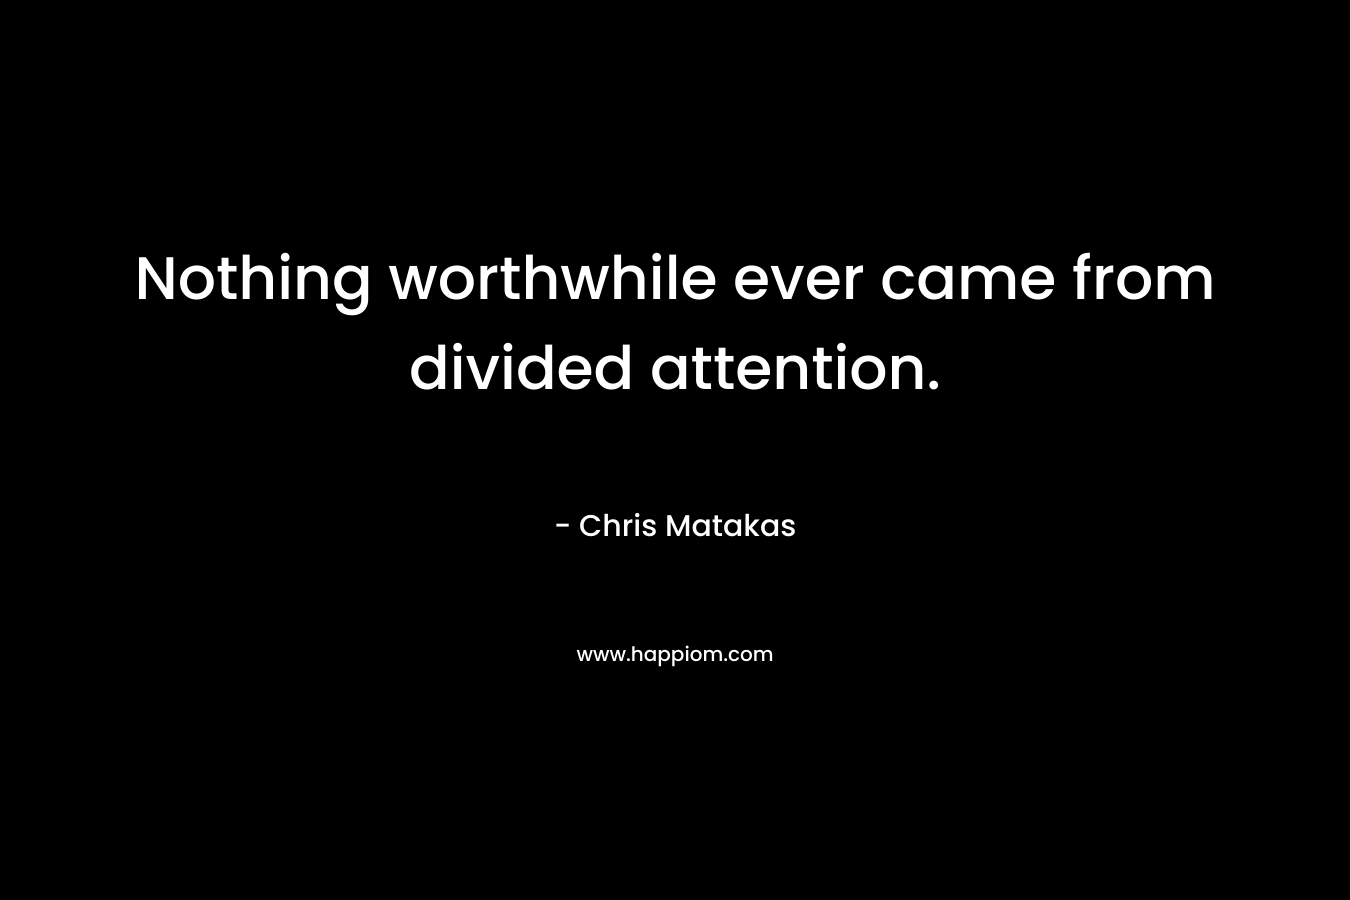 Nothing worthwhile ever came from divided attention. – Chris Matakas